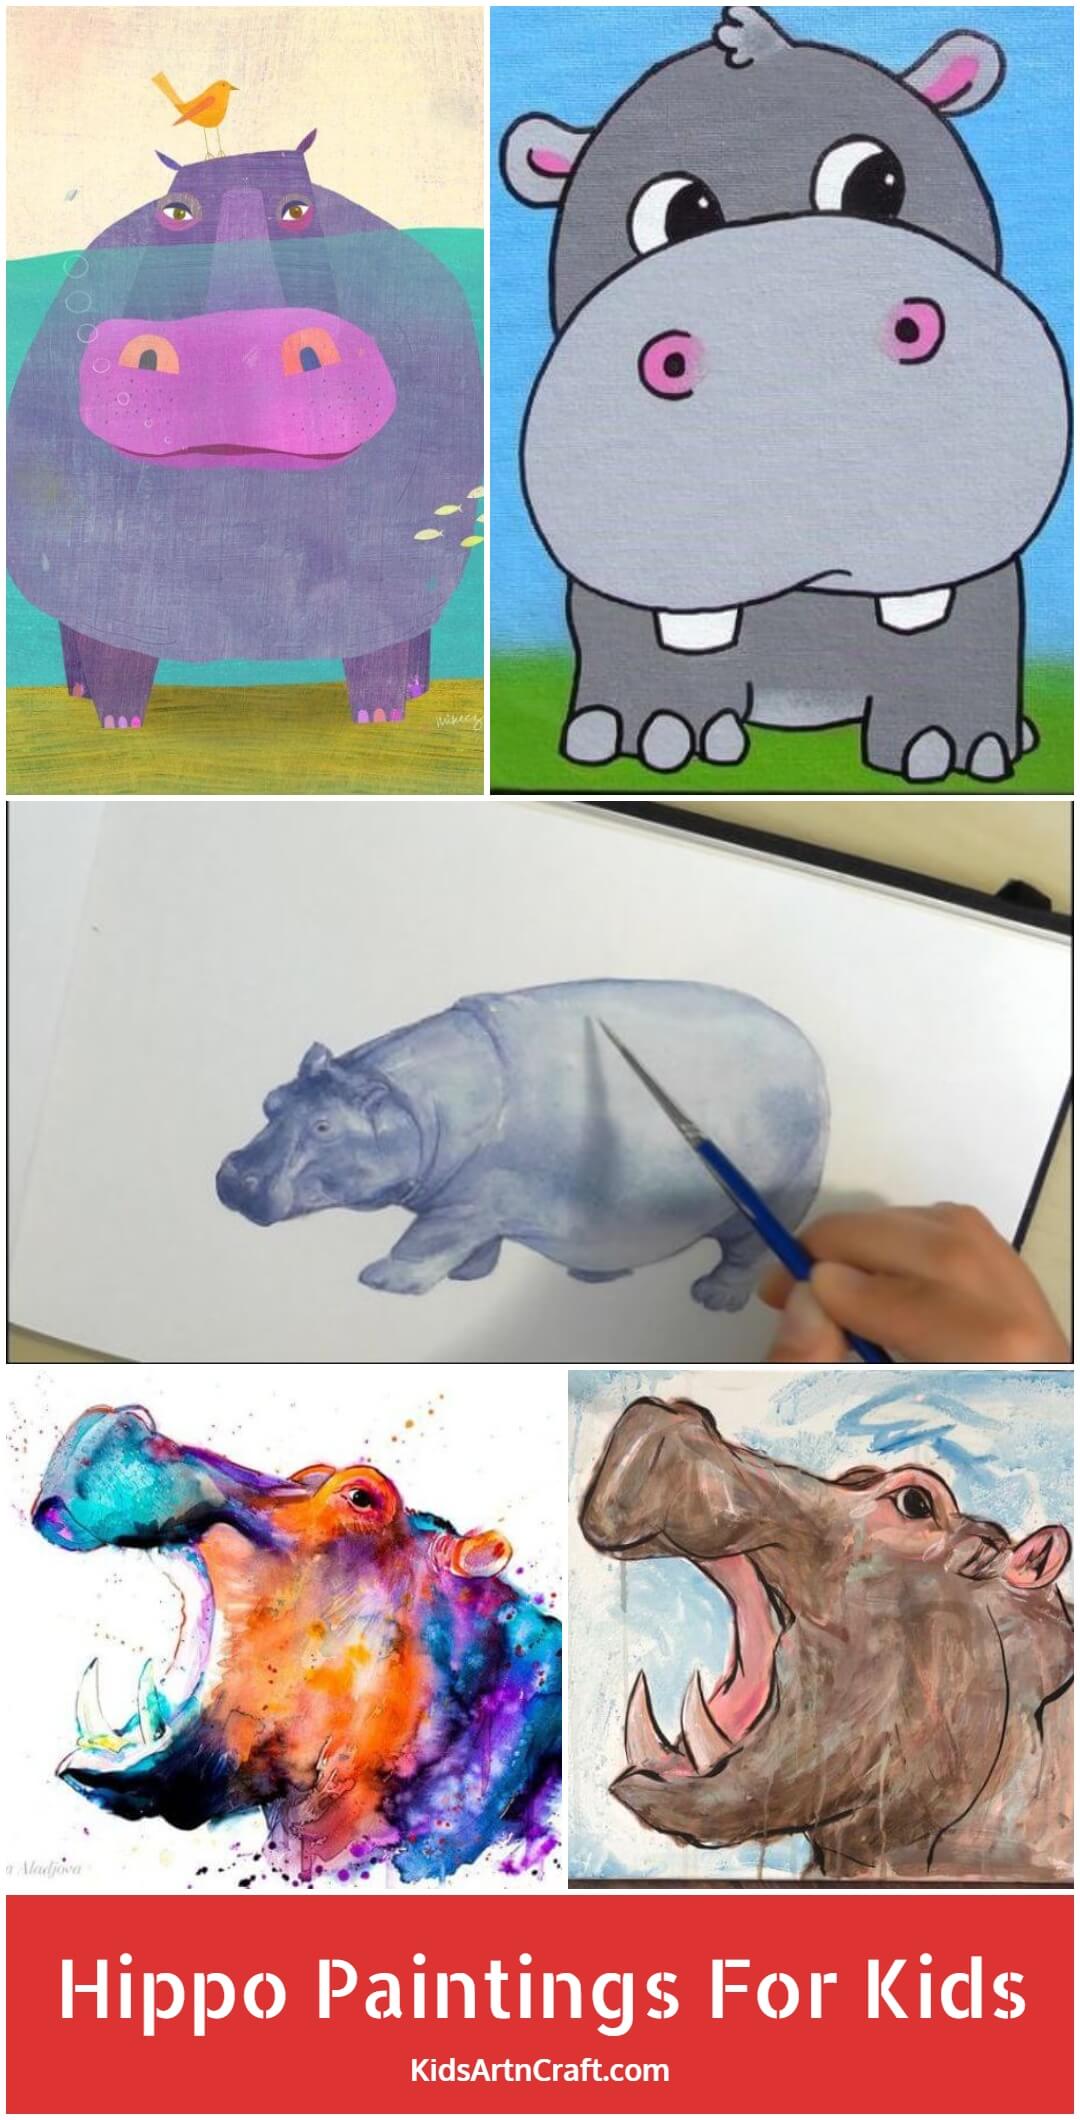 Hippo Paintings For Kids